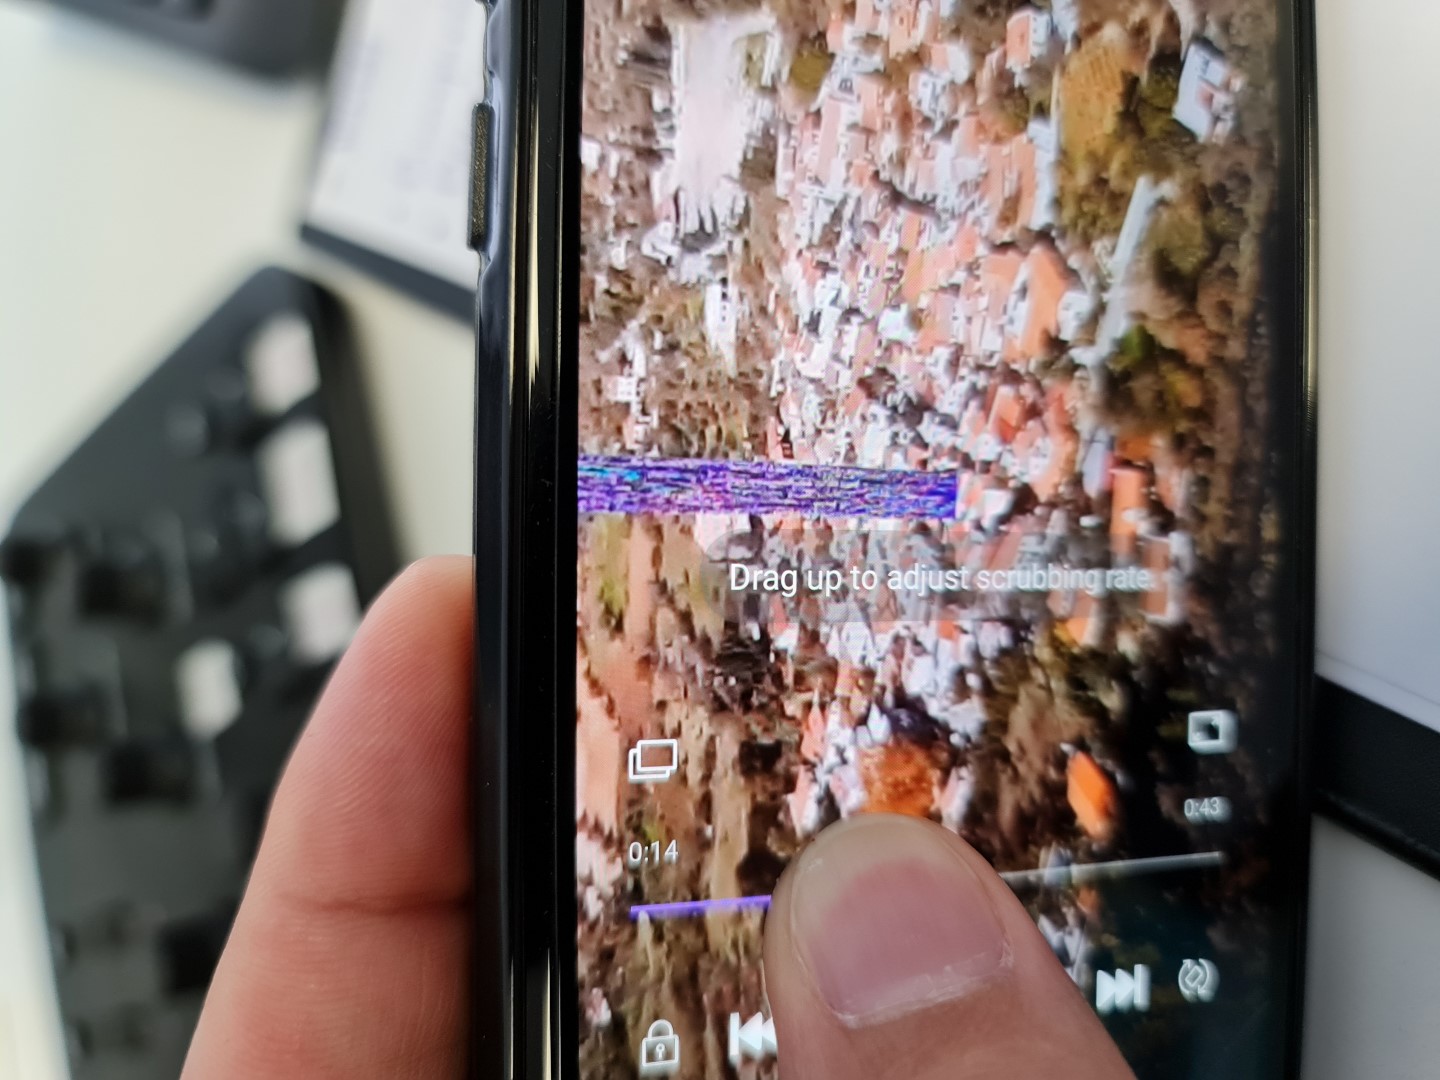 Note 20 Ultra Screen Glitches during video play an... Samsung